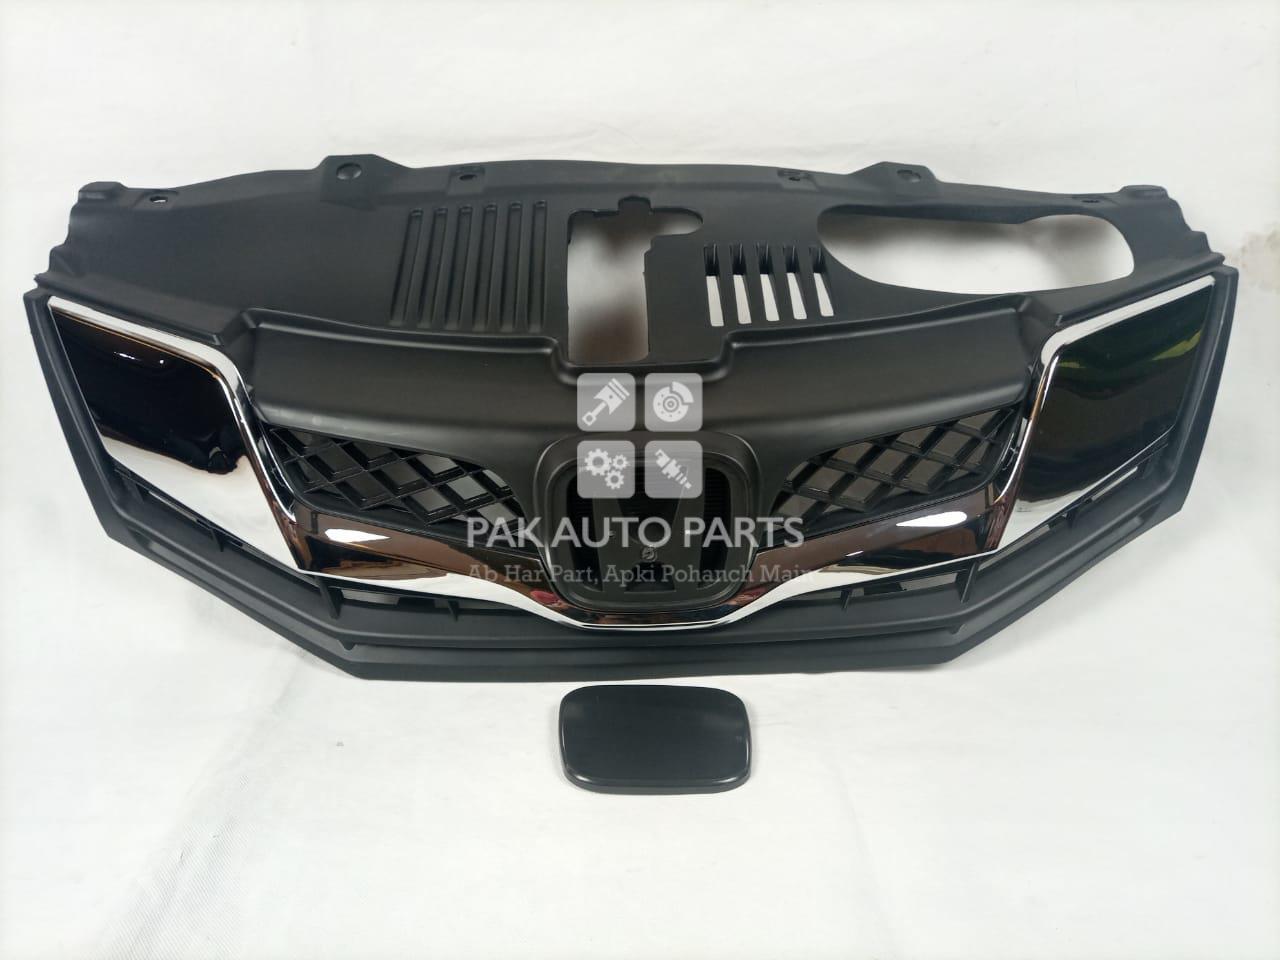 Picture of Honda City 2017-18 Front Grill